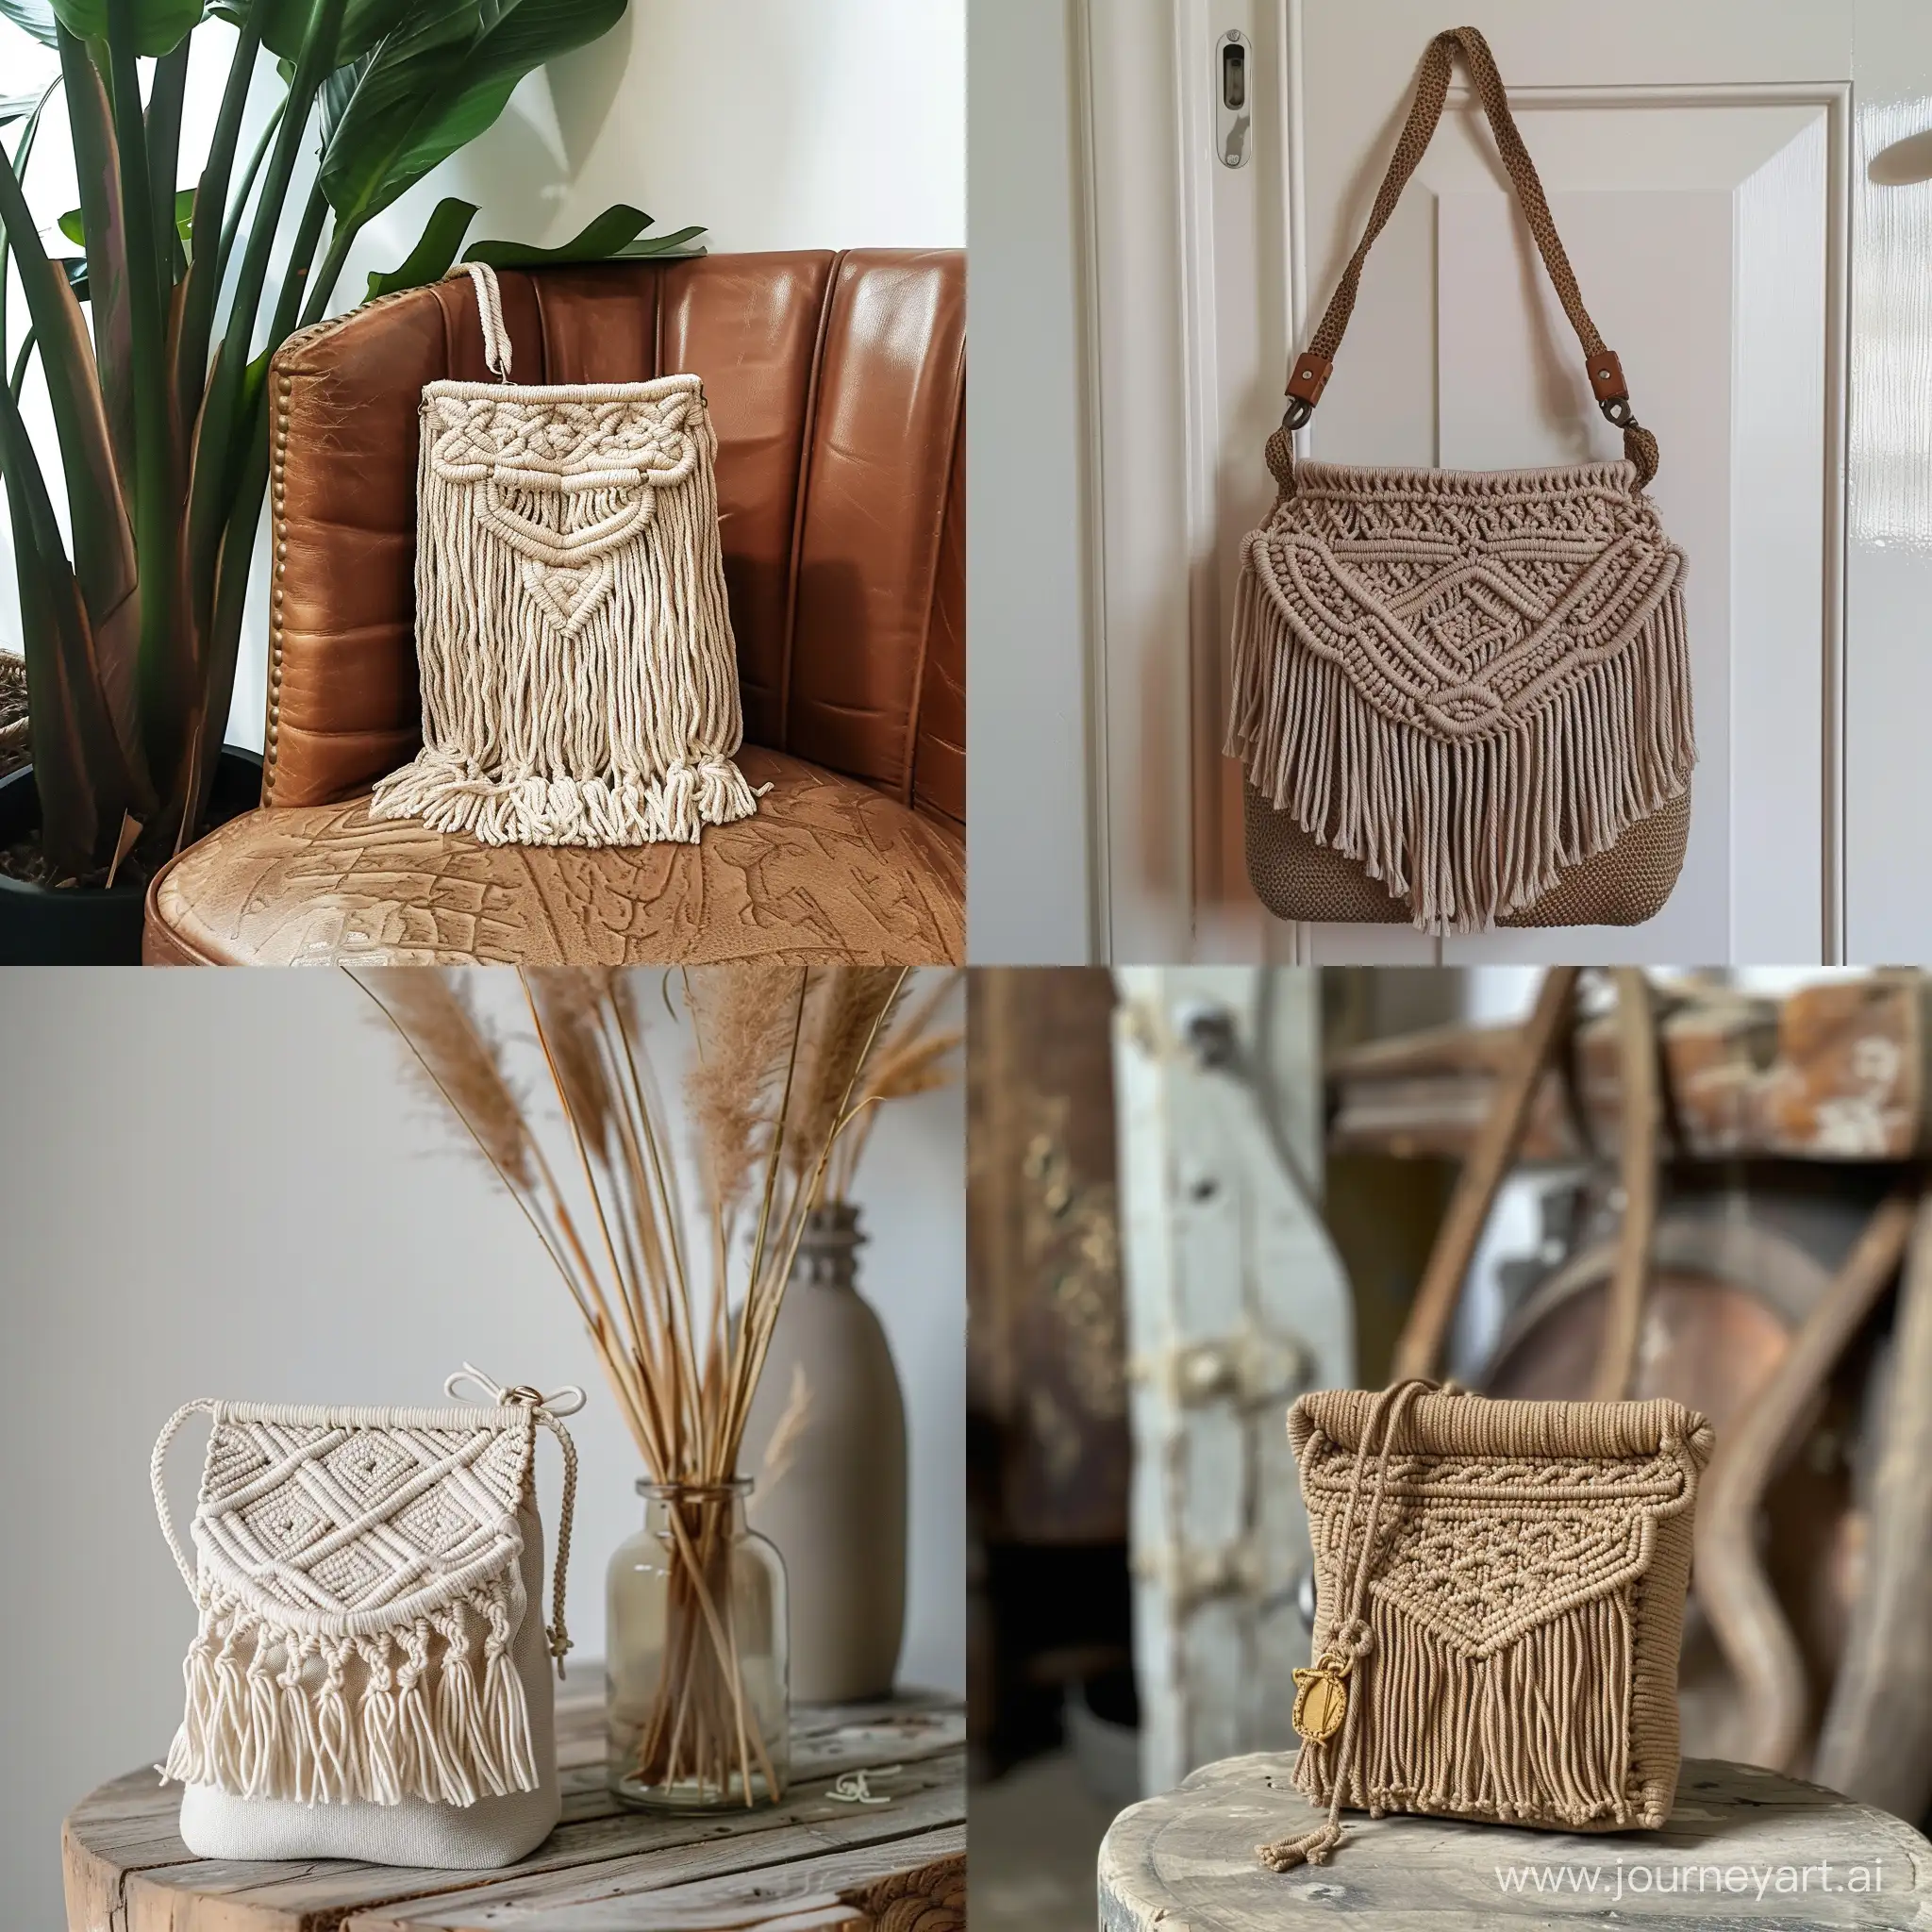 Colorful-Macrame-Bag-Hanging-from-a-Wooden-Hook